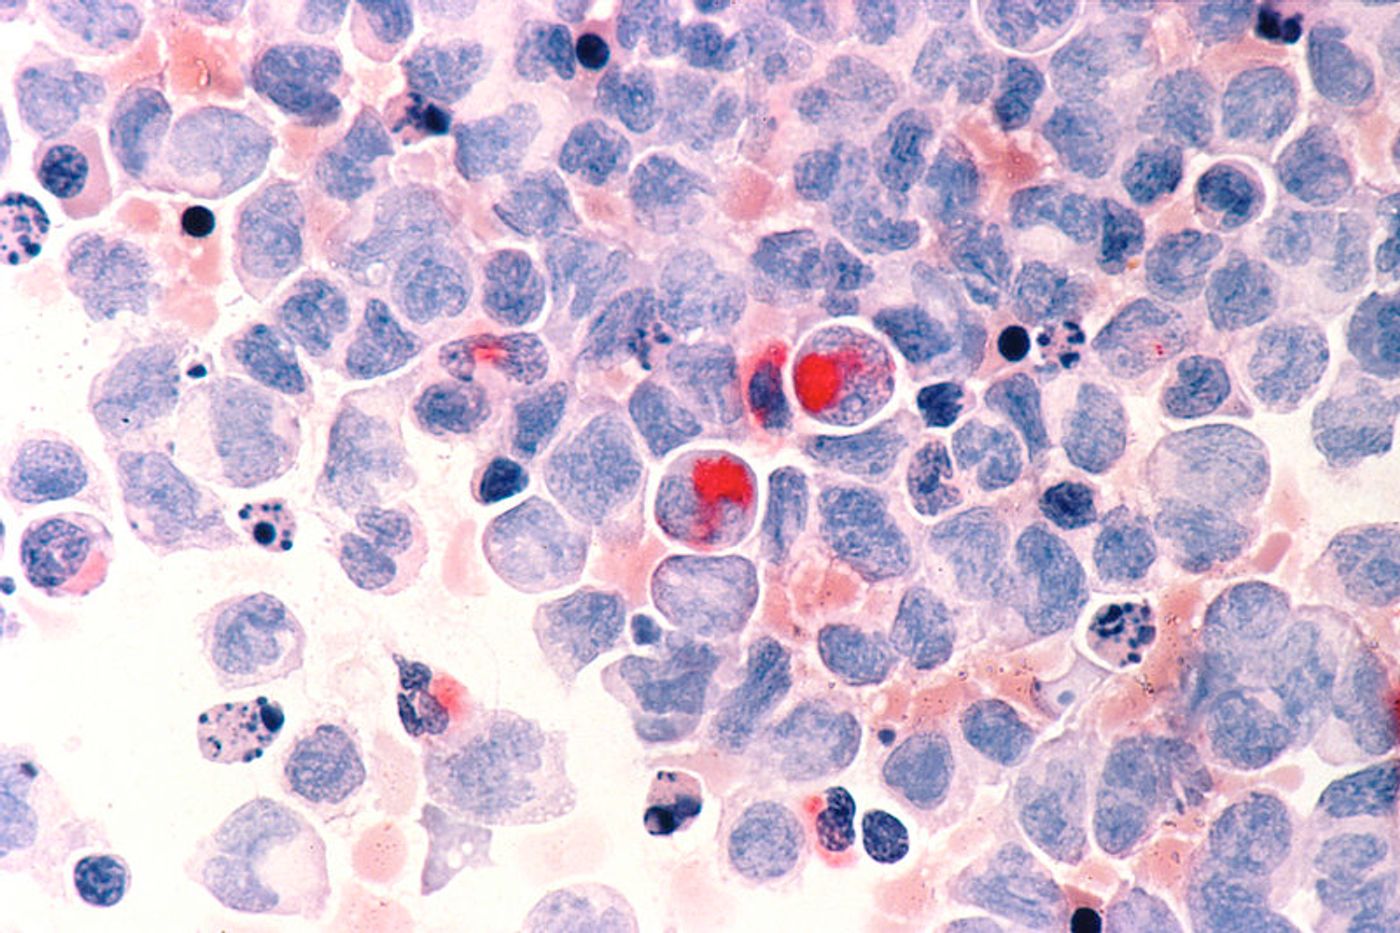 Human cells with acute myelocytic leukemia (AML). Credit: National Cancer Institute